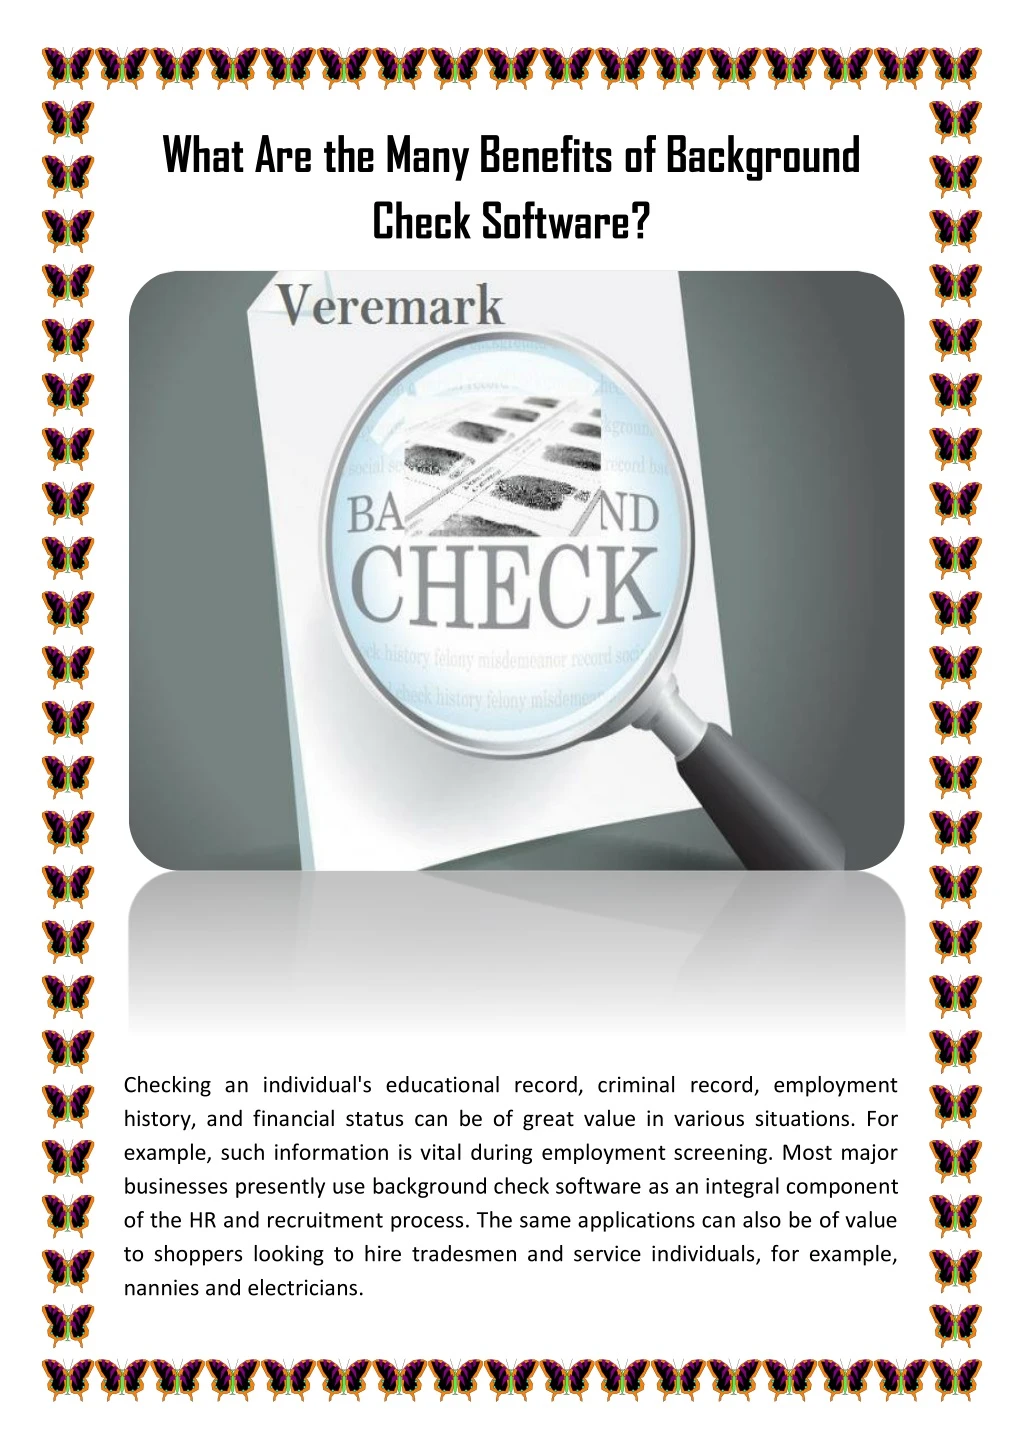 what are the many benefits of background check